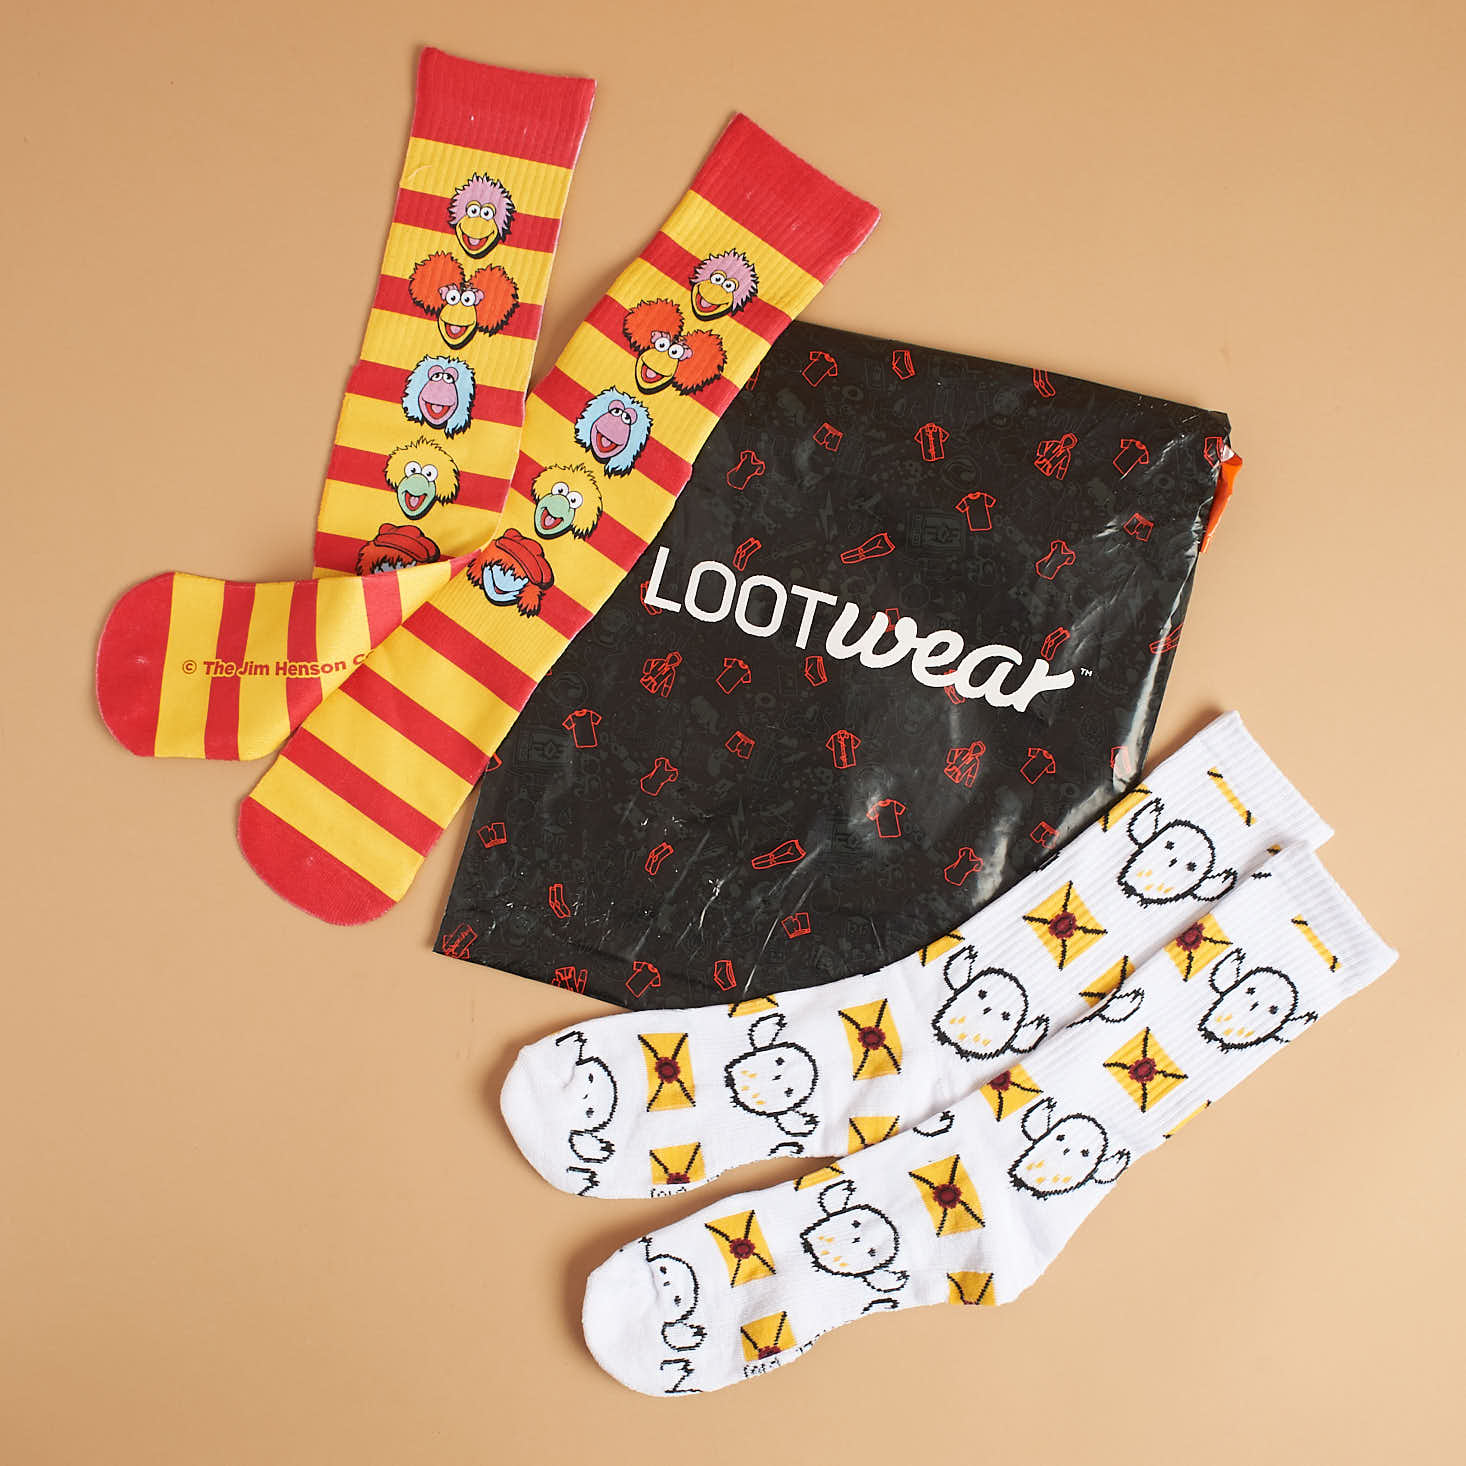 Loot Socks Subscription by Loot Crate Review + Coupon – January 2018